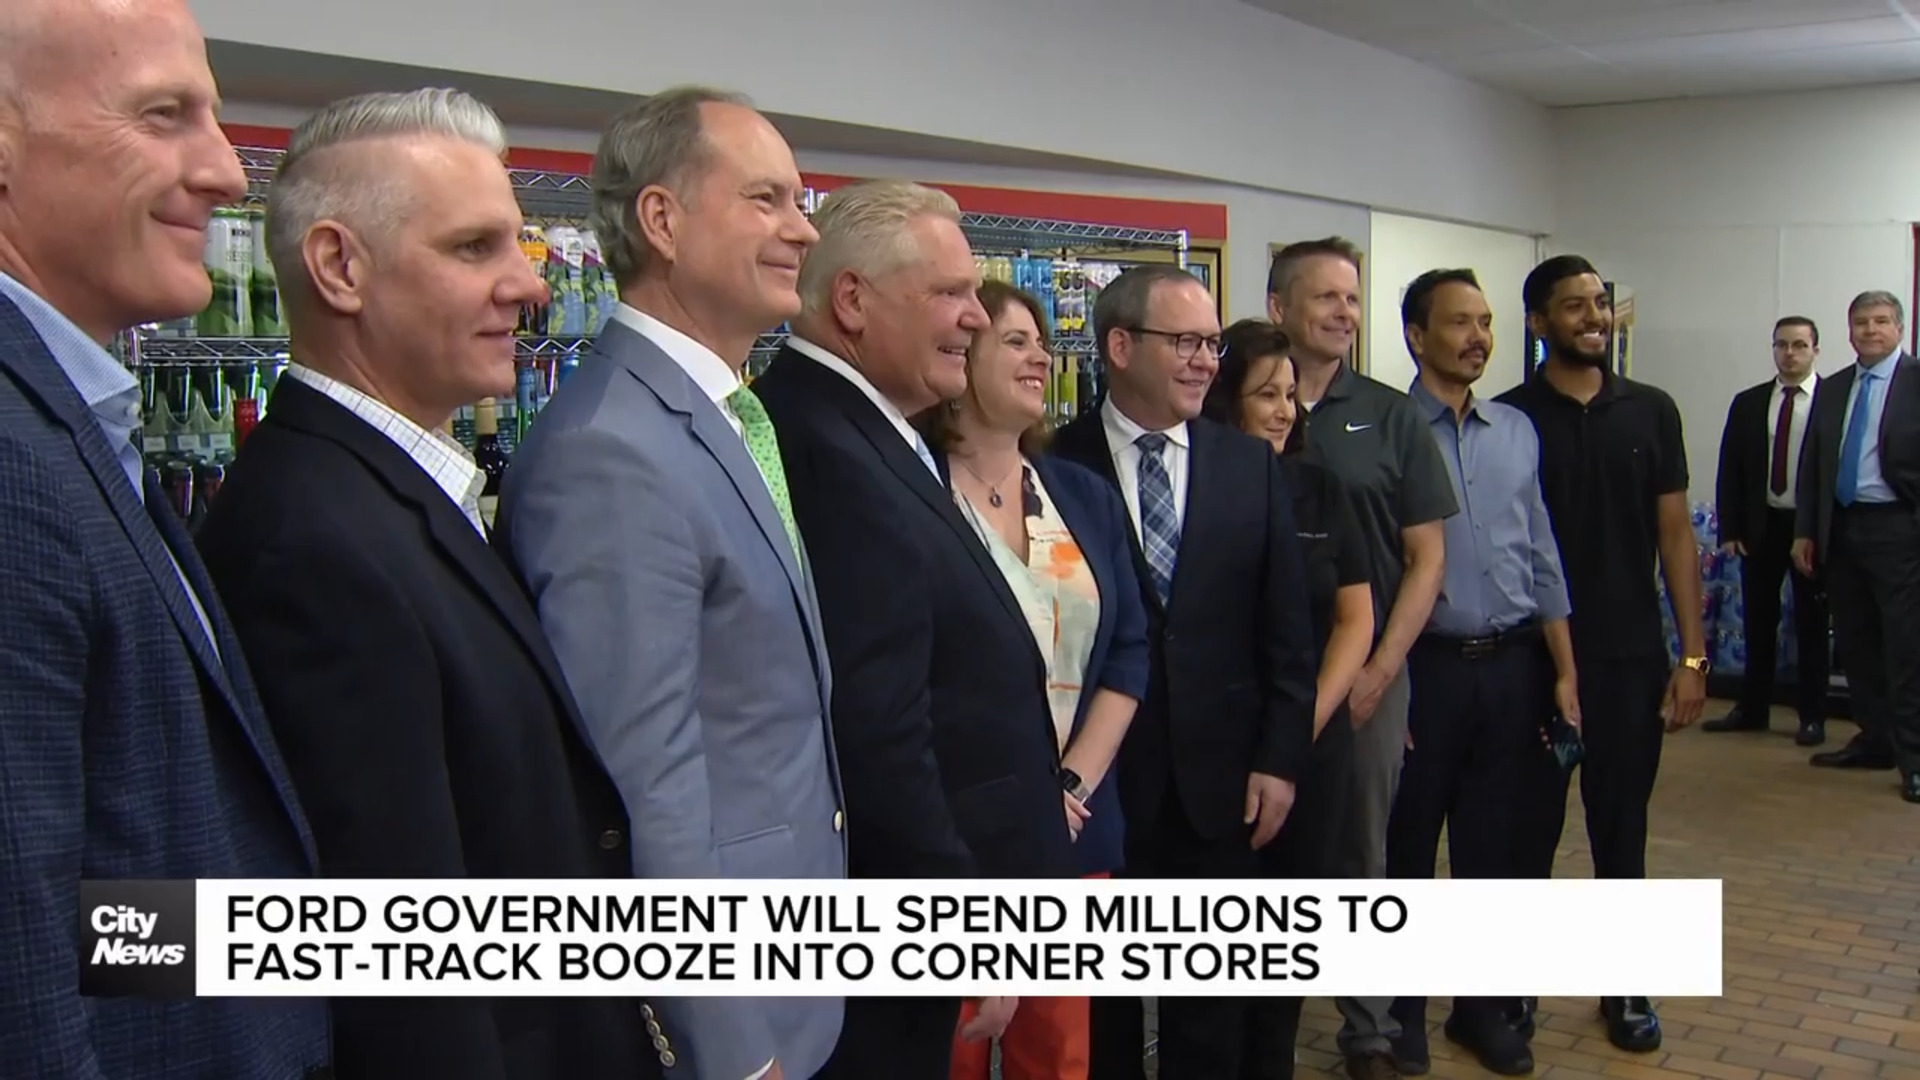 Ford government to spend millions to fast-track booze in corner stores